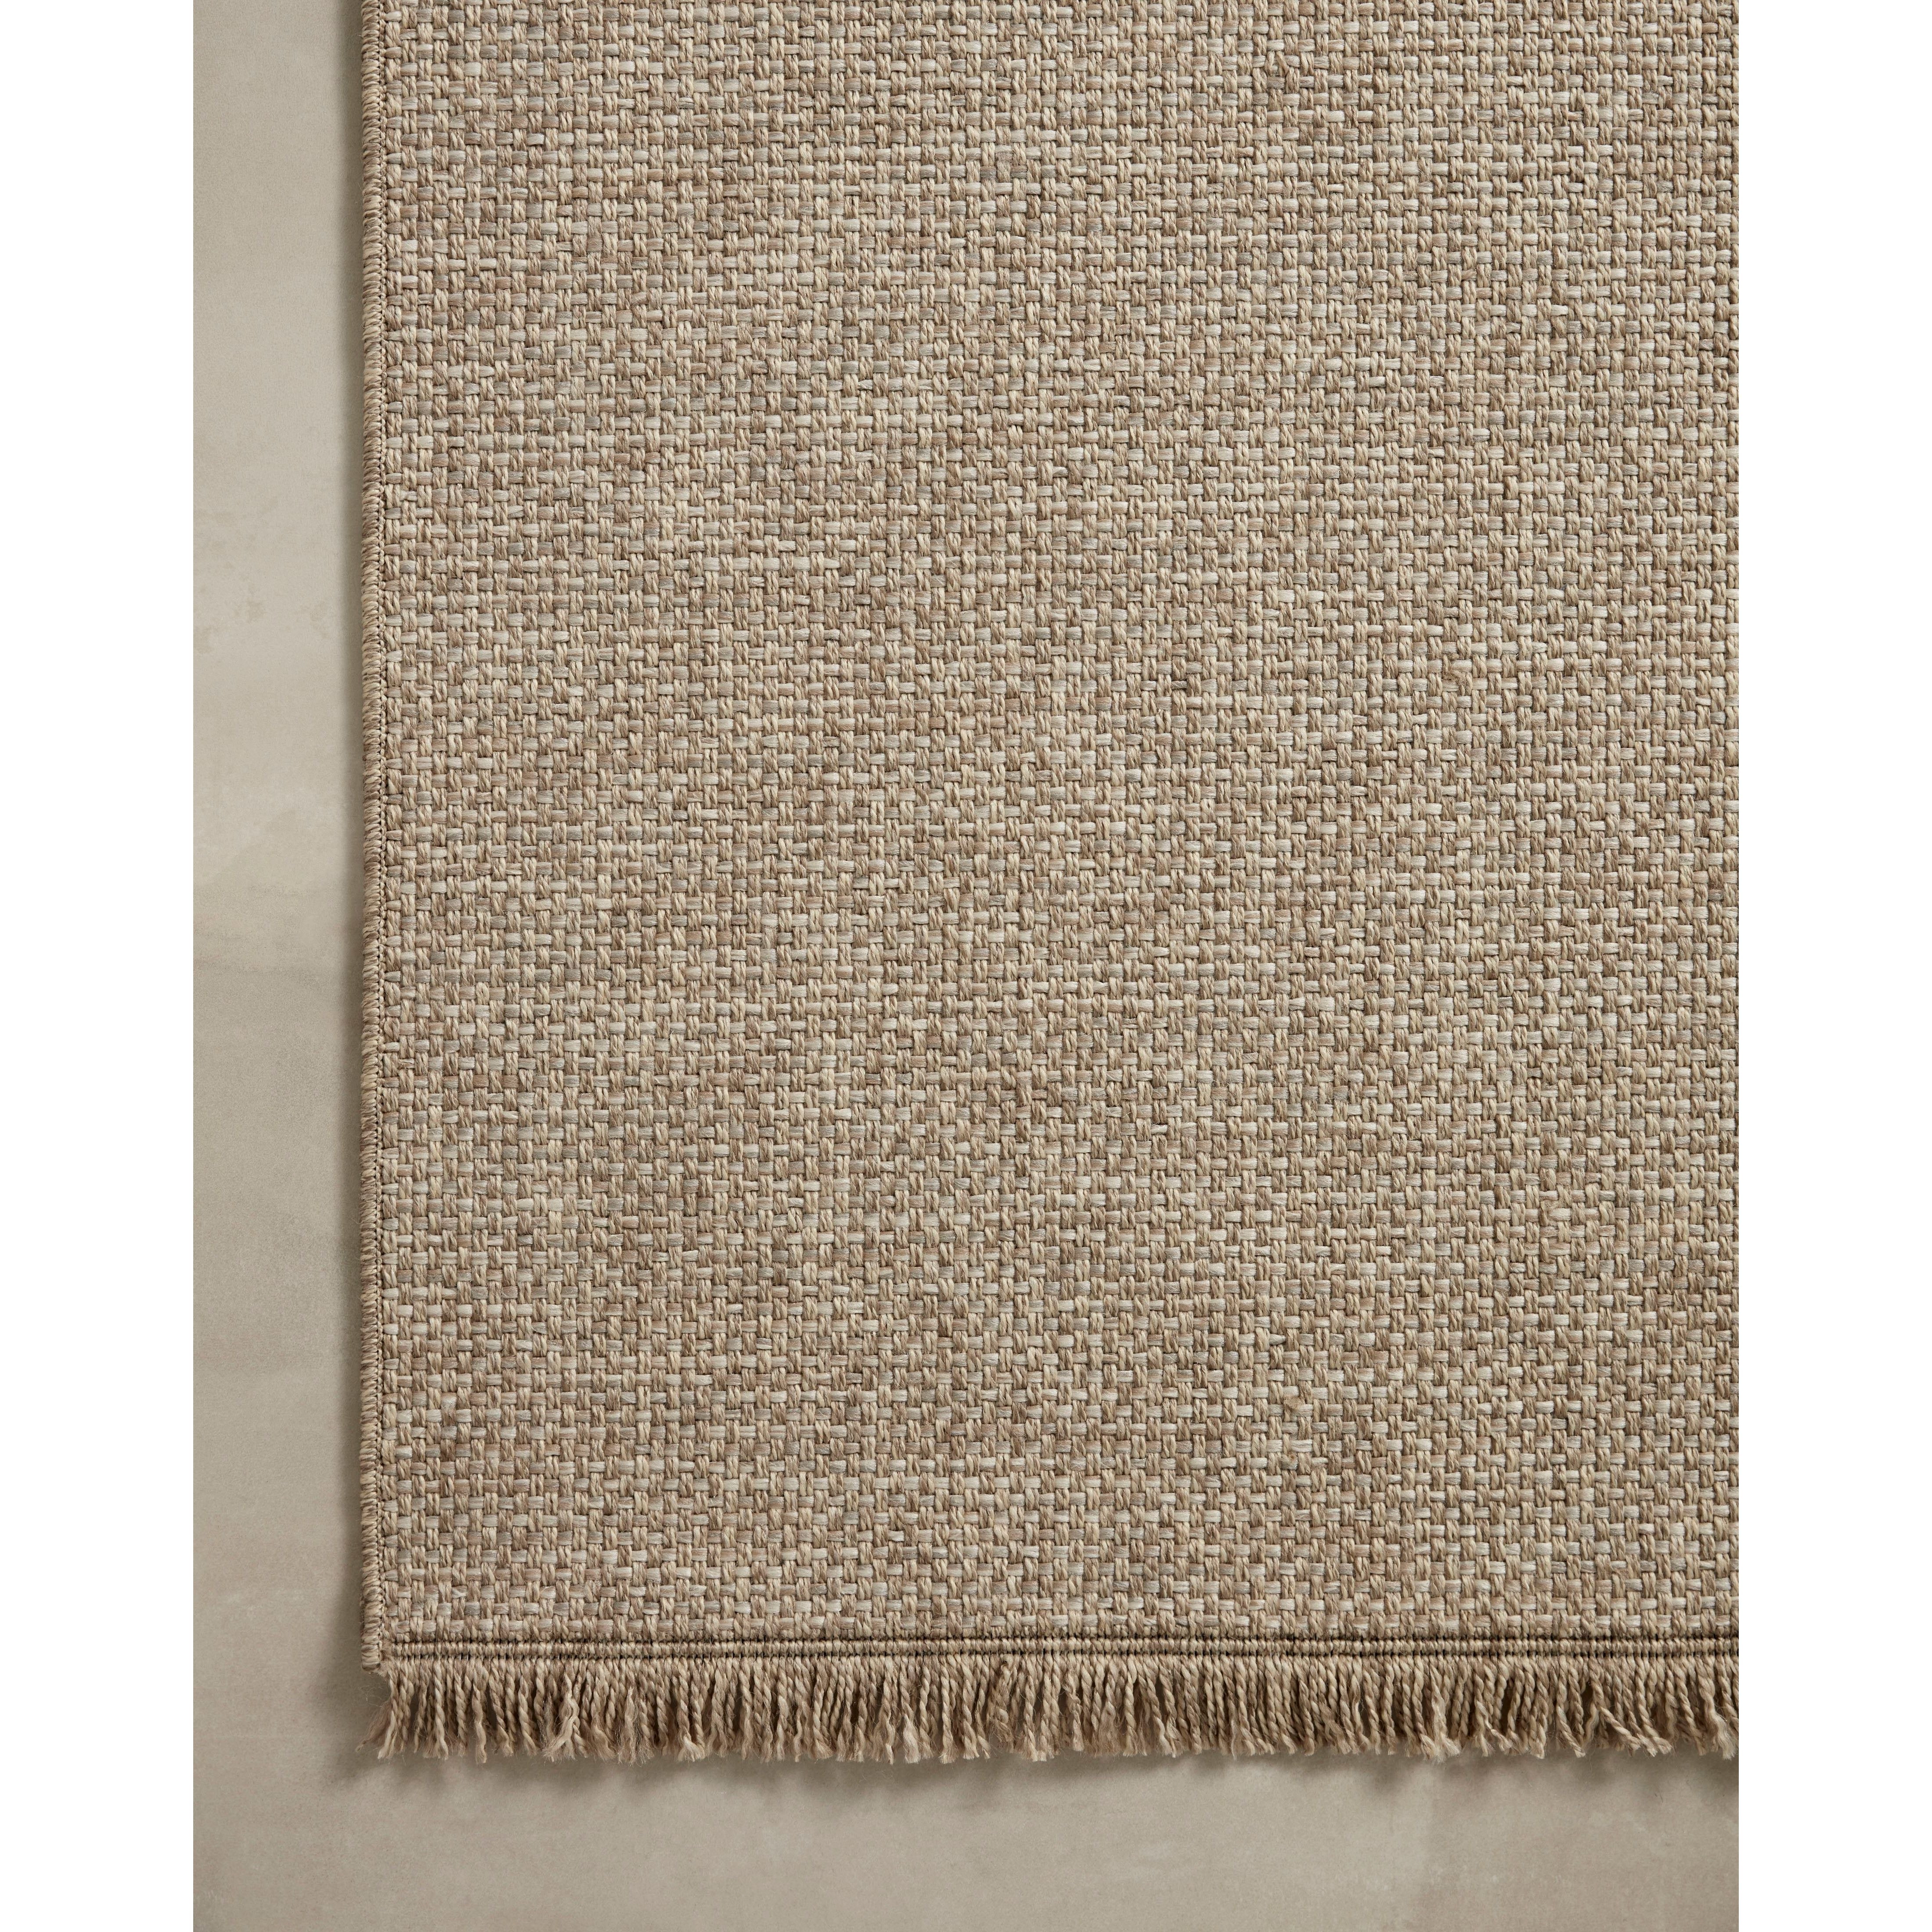 Made for sunny days ahead, the Dawn Collection is an indoor/outdoor rug that looks like a woven sisal rug but is power-loomed of 100% polypropylene, which makes it water- and mildew-resistant (so it's ready for rainy days ahead, too). Amethyst Home provides interior design, new home construction design consulting, vintage area rugs, and lighting in the Washington metro area.